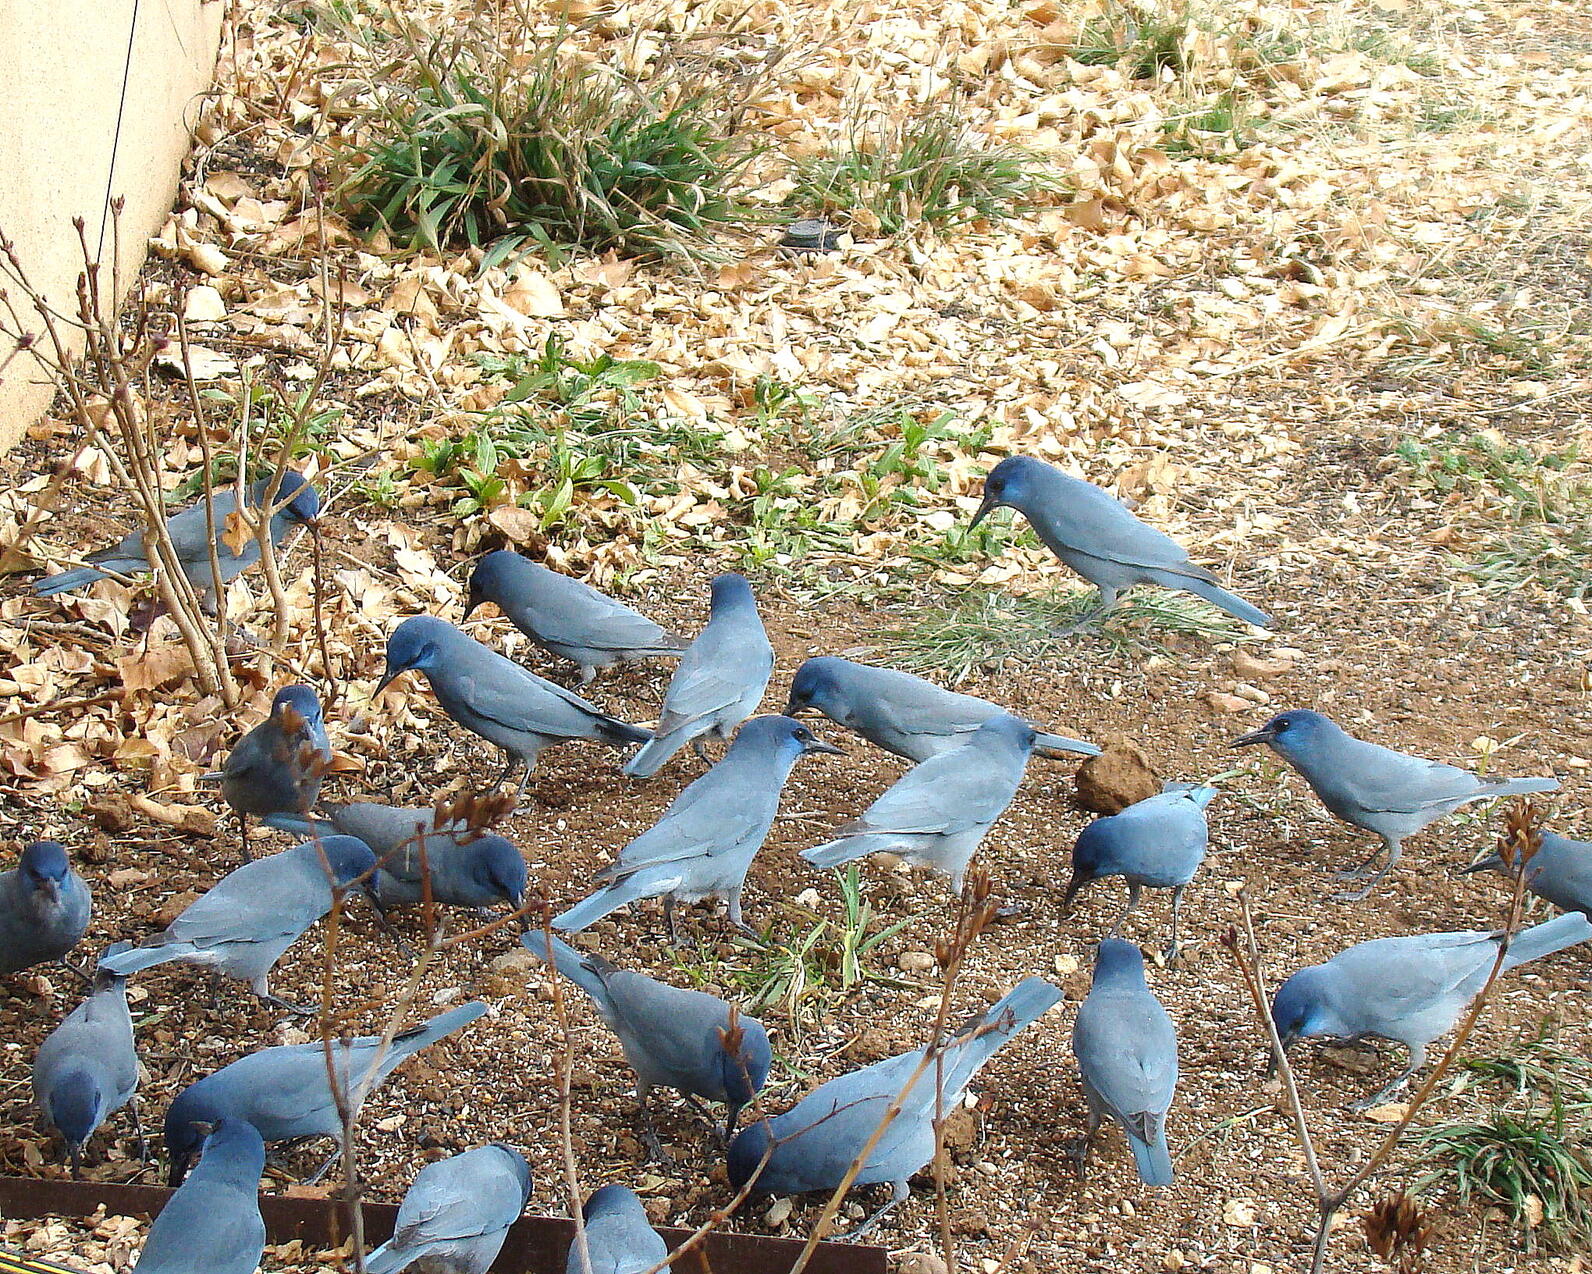 A group of about 20 Pinyon Jays stand in a tight cluster on the ground.  Several birds are leaned over foraging or stashing Pinyon seeds.